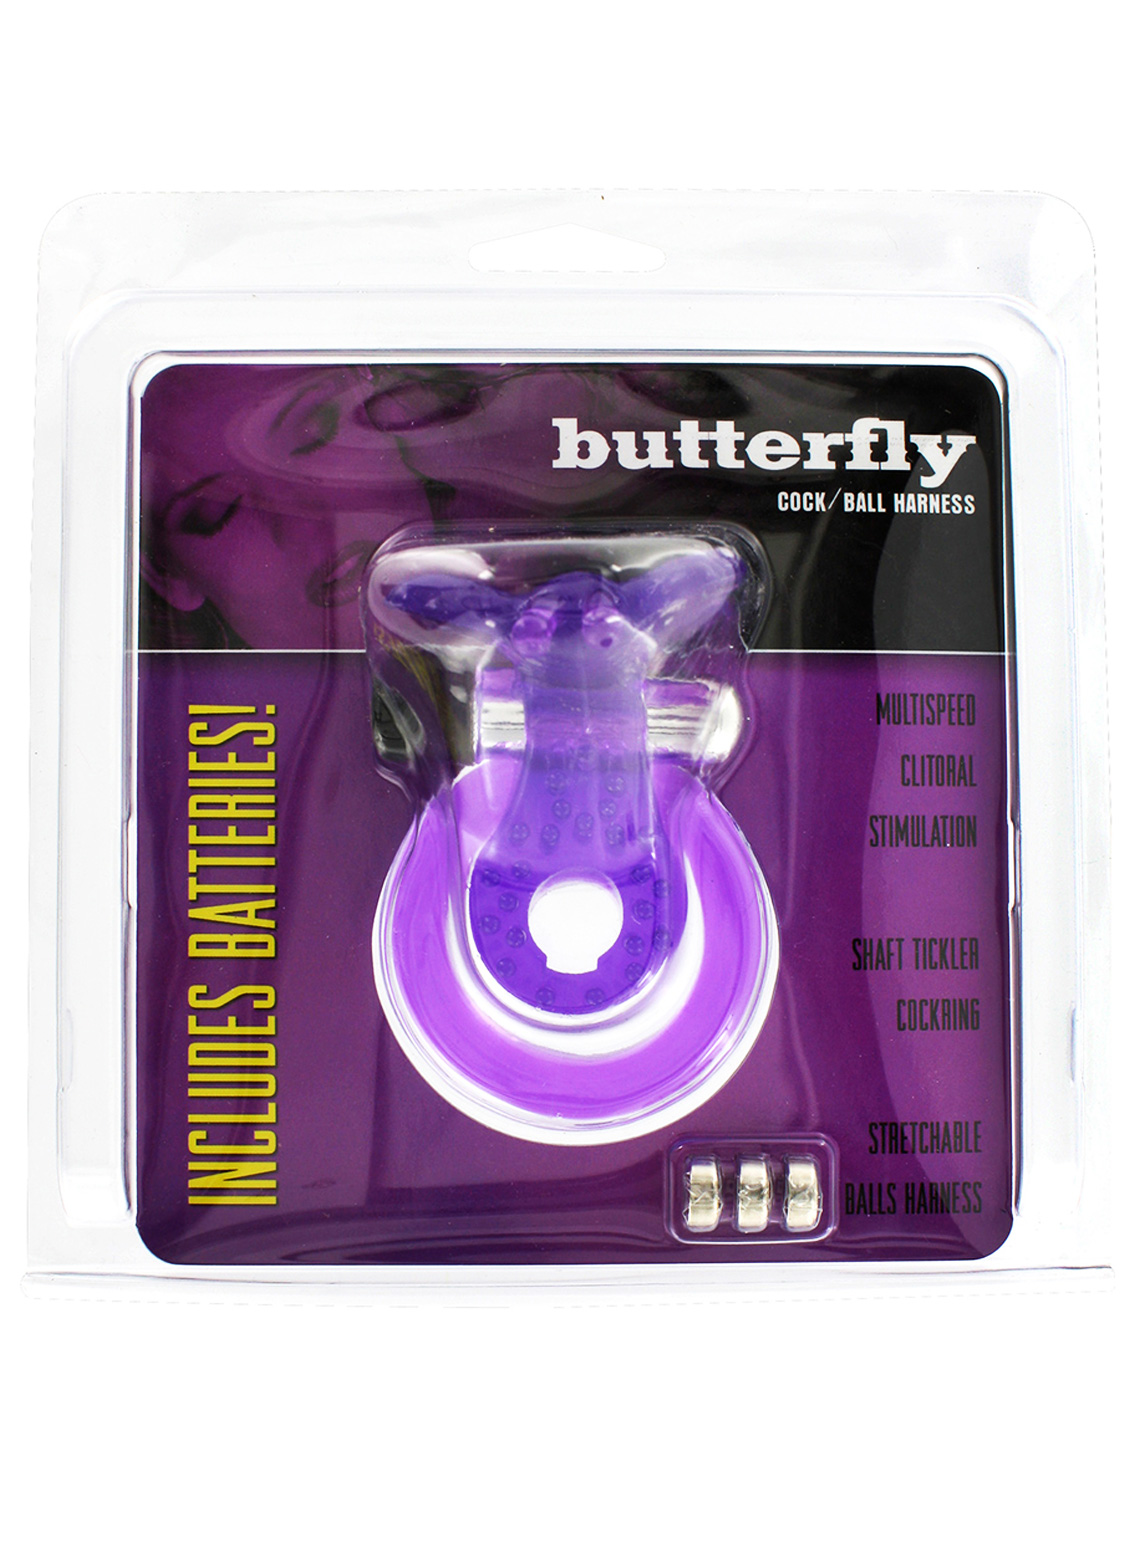 Seven Creations Butterfly Cock/Ball Harness